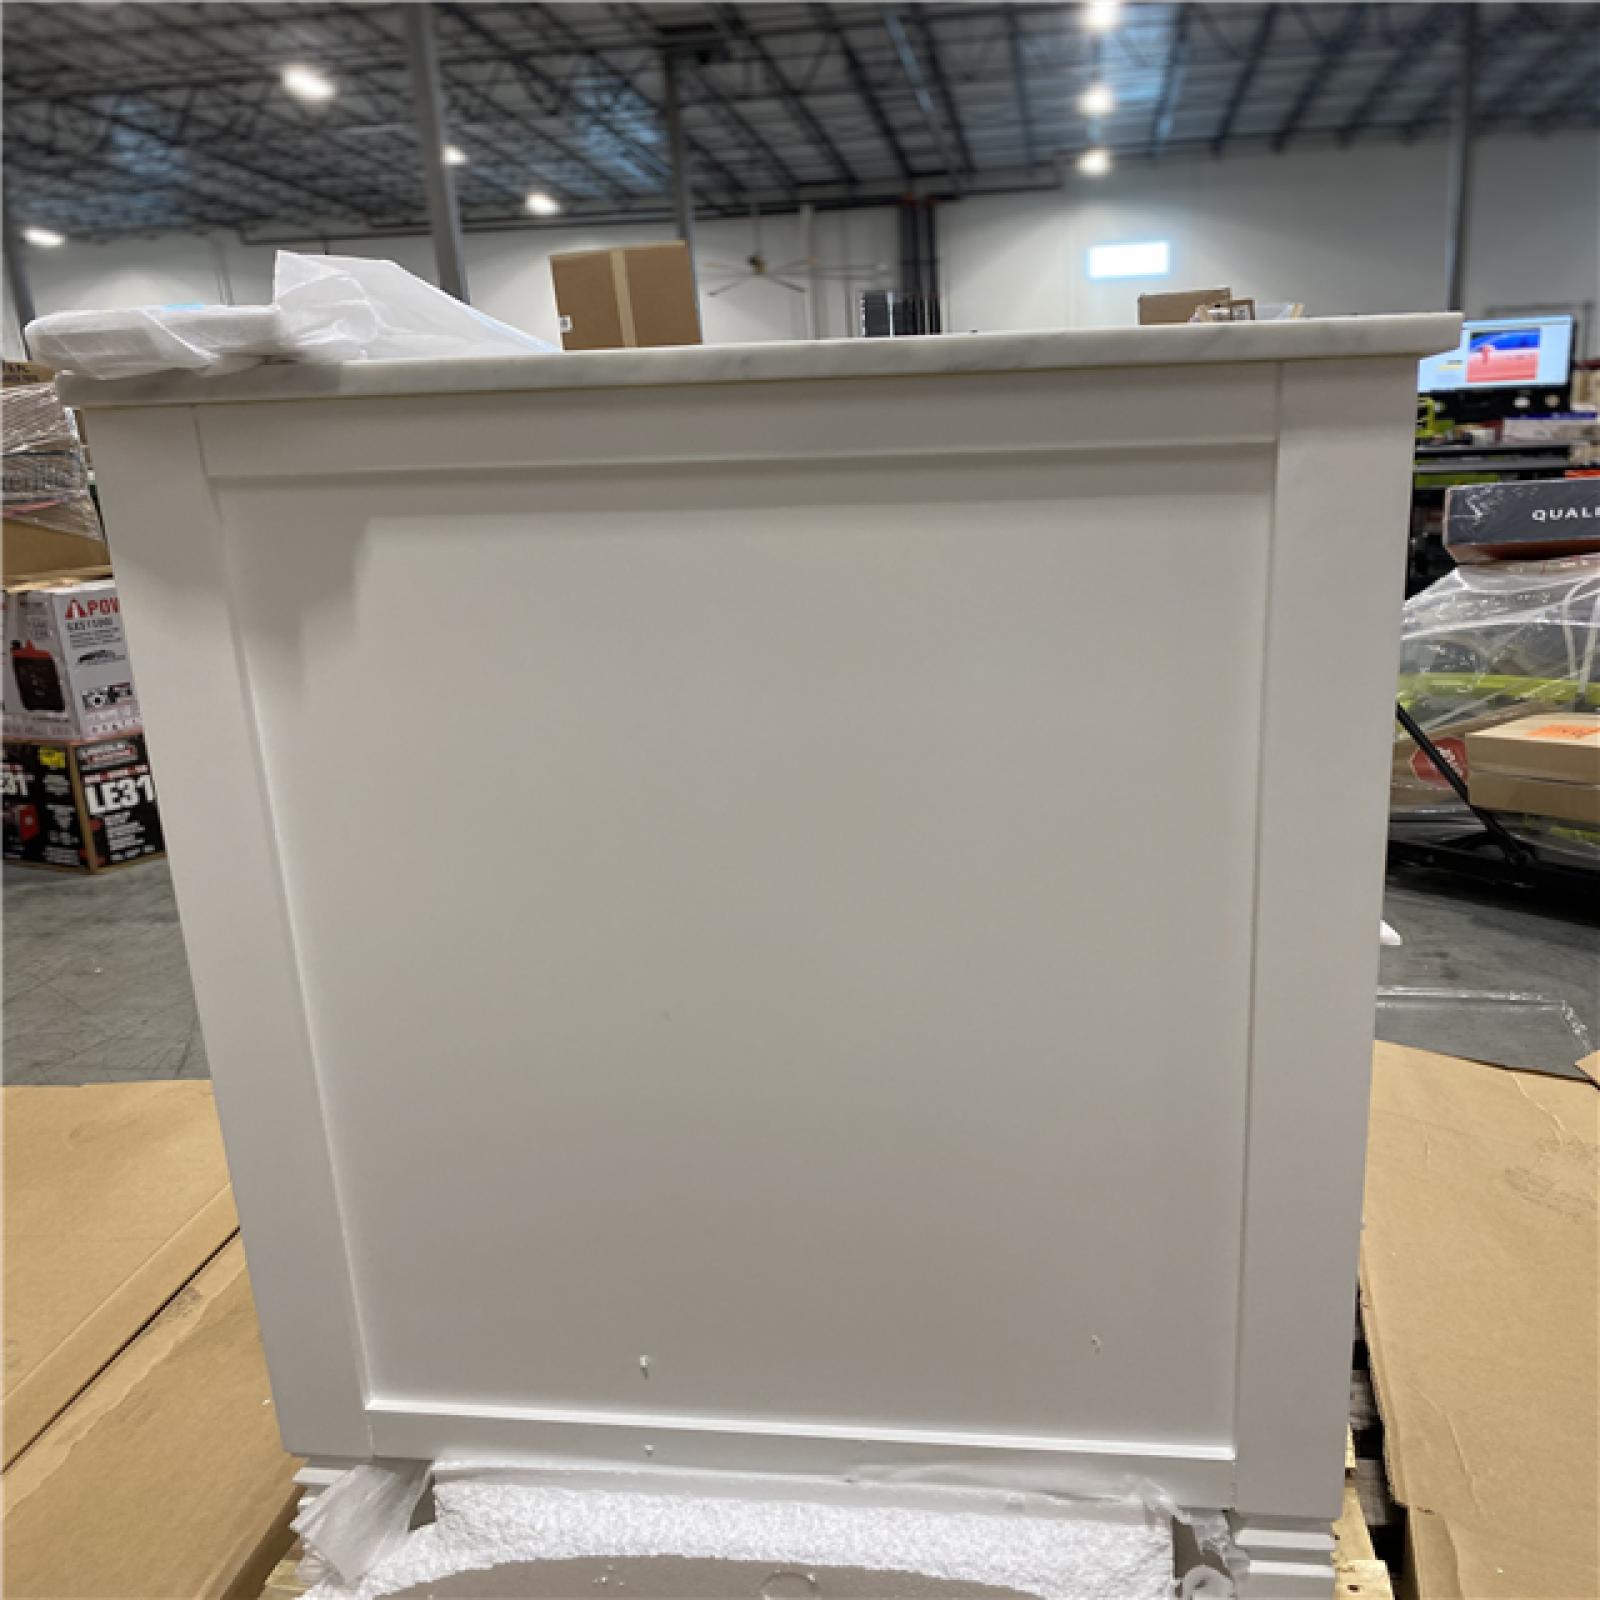 DALLAS LOCATION - NEW! Home Decorators Collection Stockham Single Sink Freestanding Bath Vanity in White with Carrara Marble